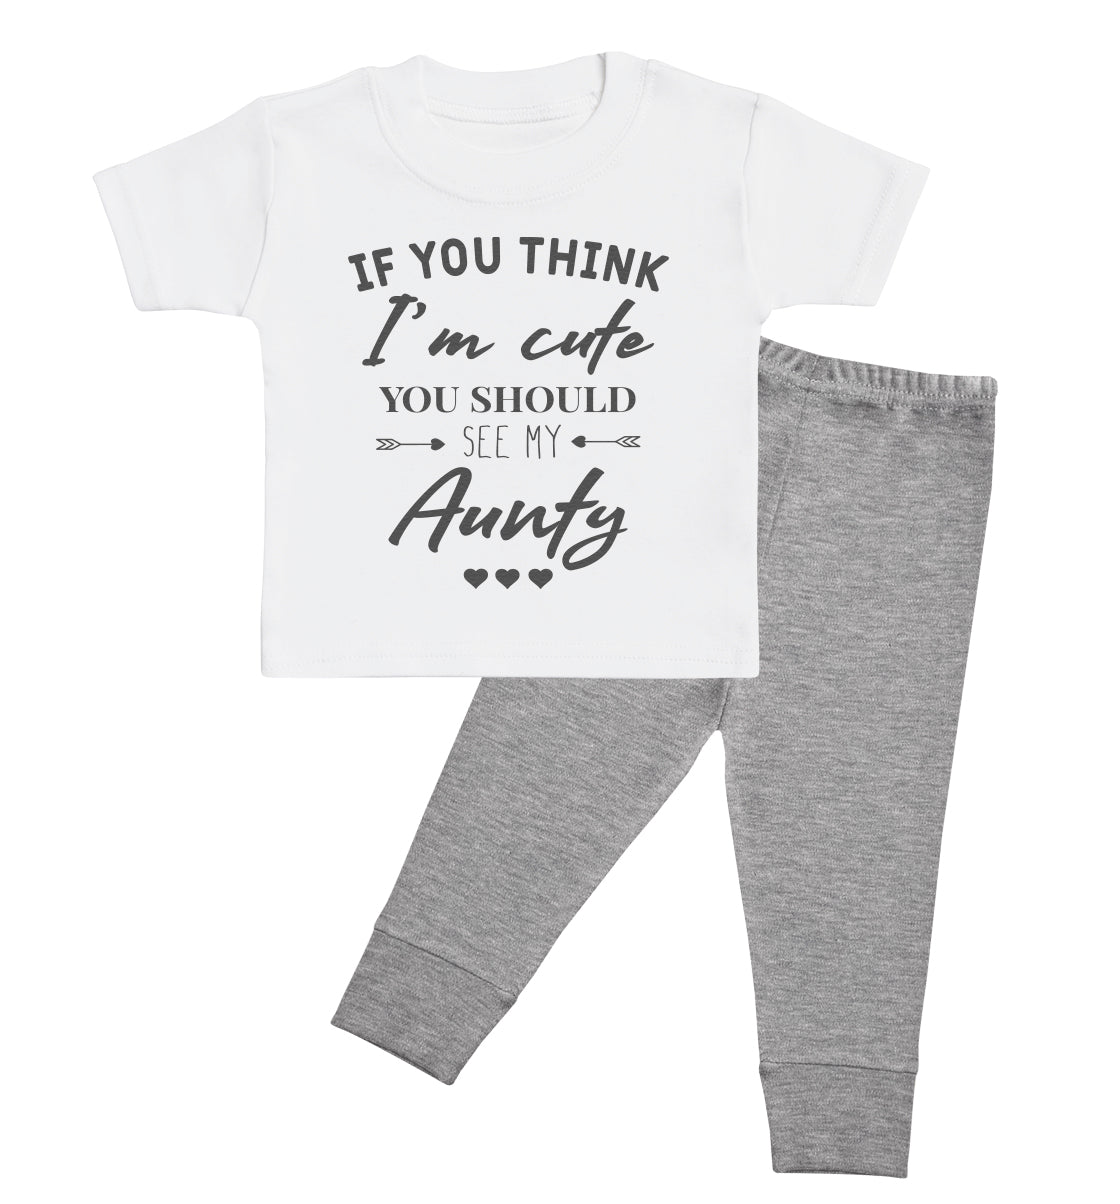 Pick A Family Name - Cute Mummy, Auntie, Grandad and more - Baby Outfit Set